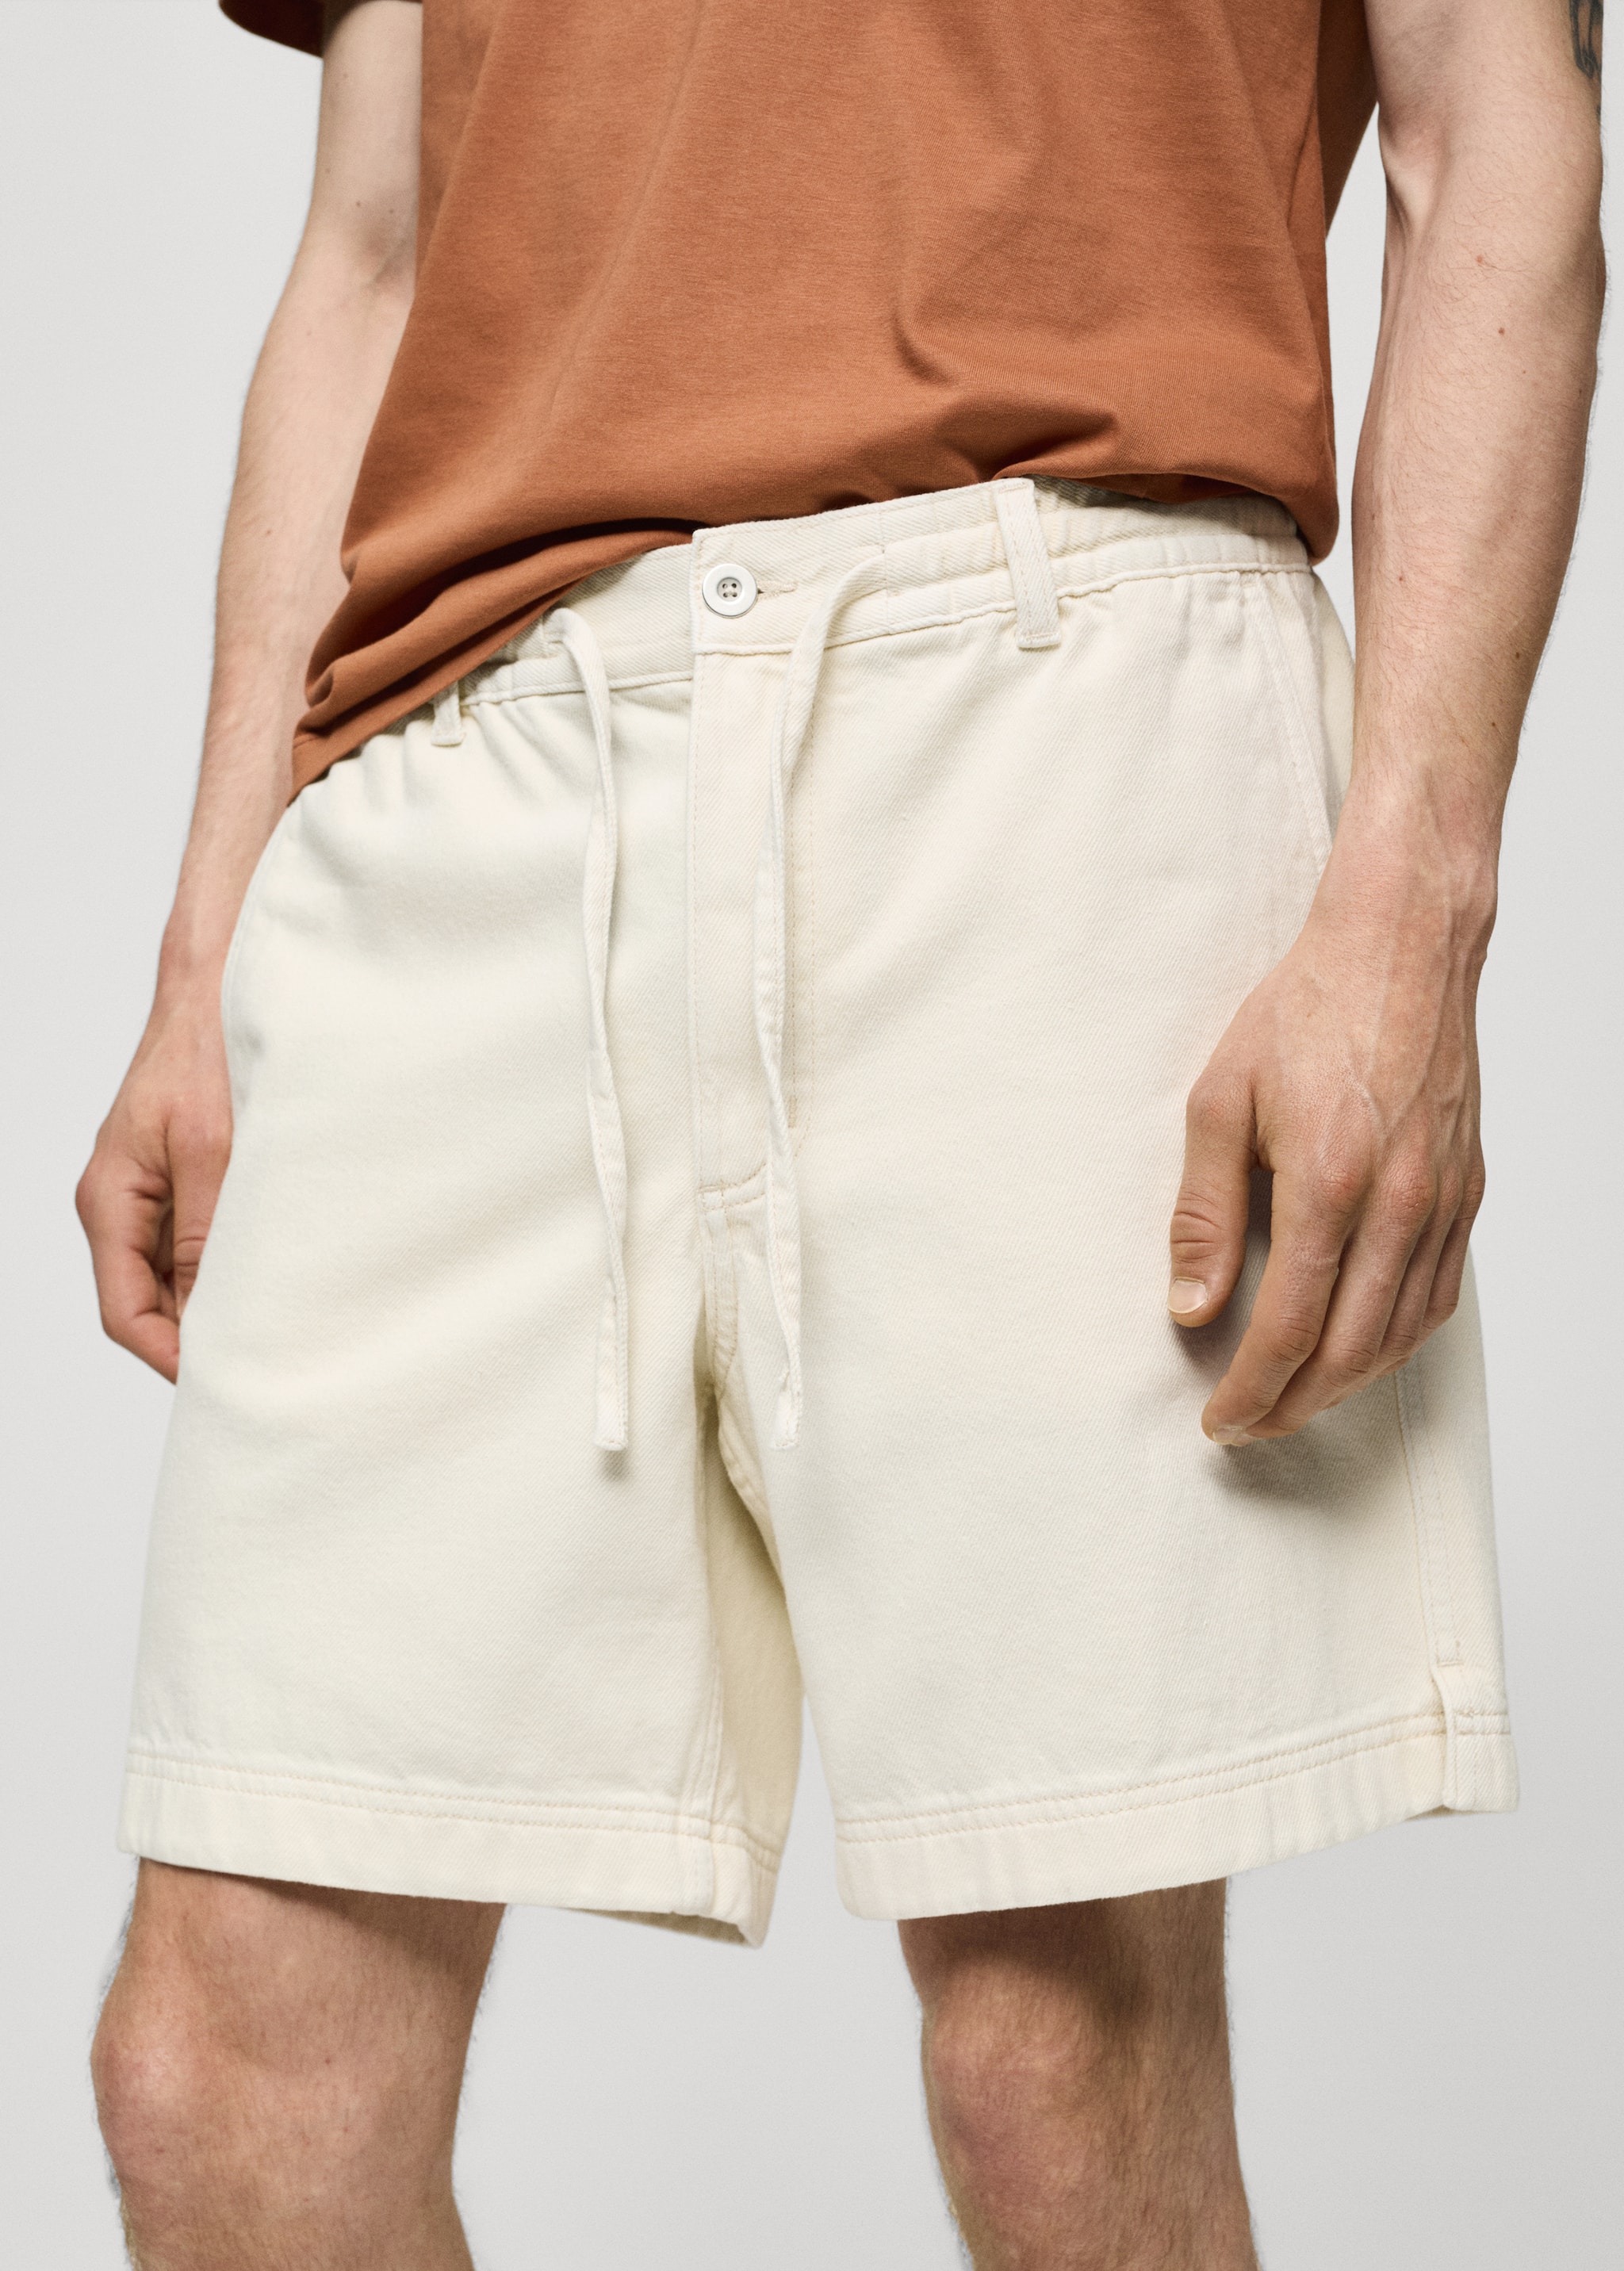 100% cotton drawstring Bermuda shorts - Details of the article 1